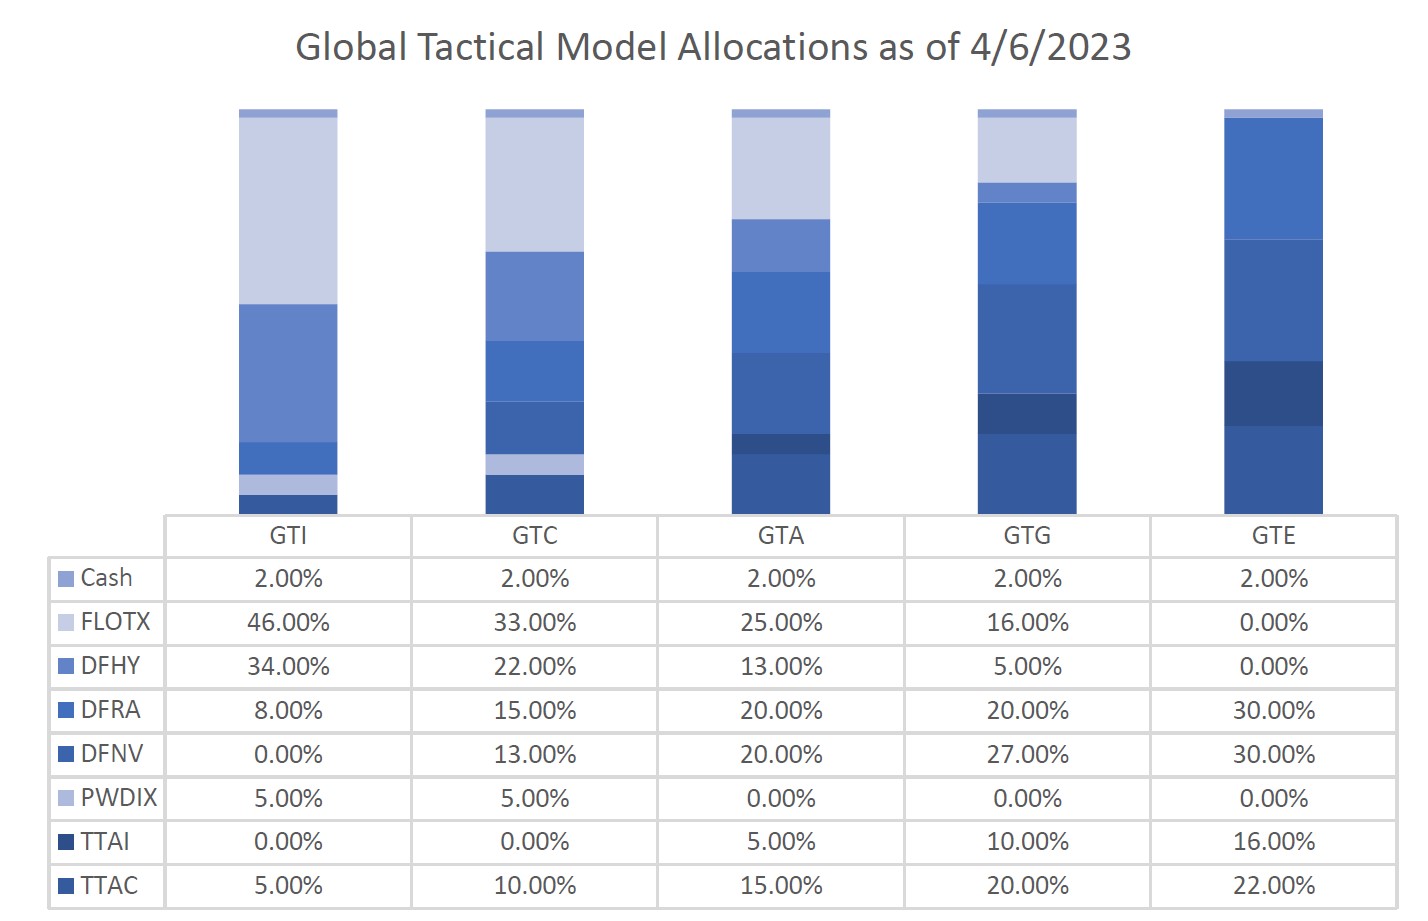 Global Tactical Model Allocations as of 04/06/2023